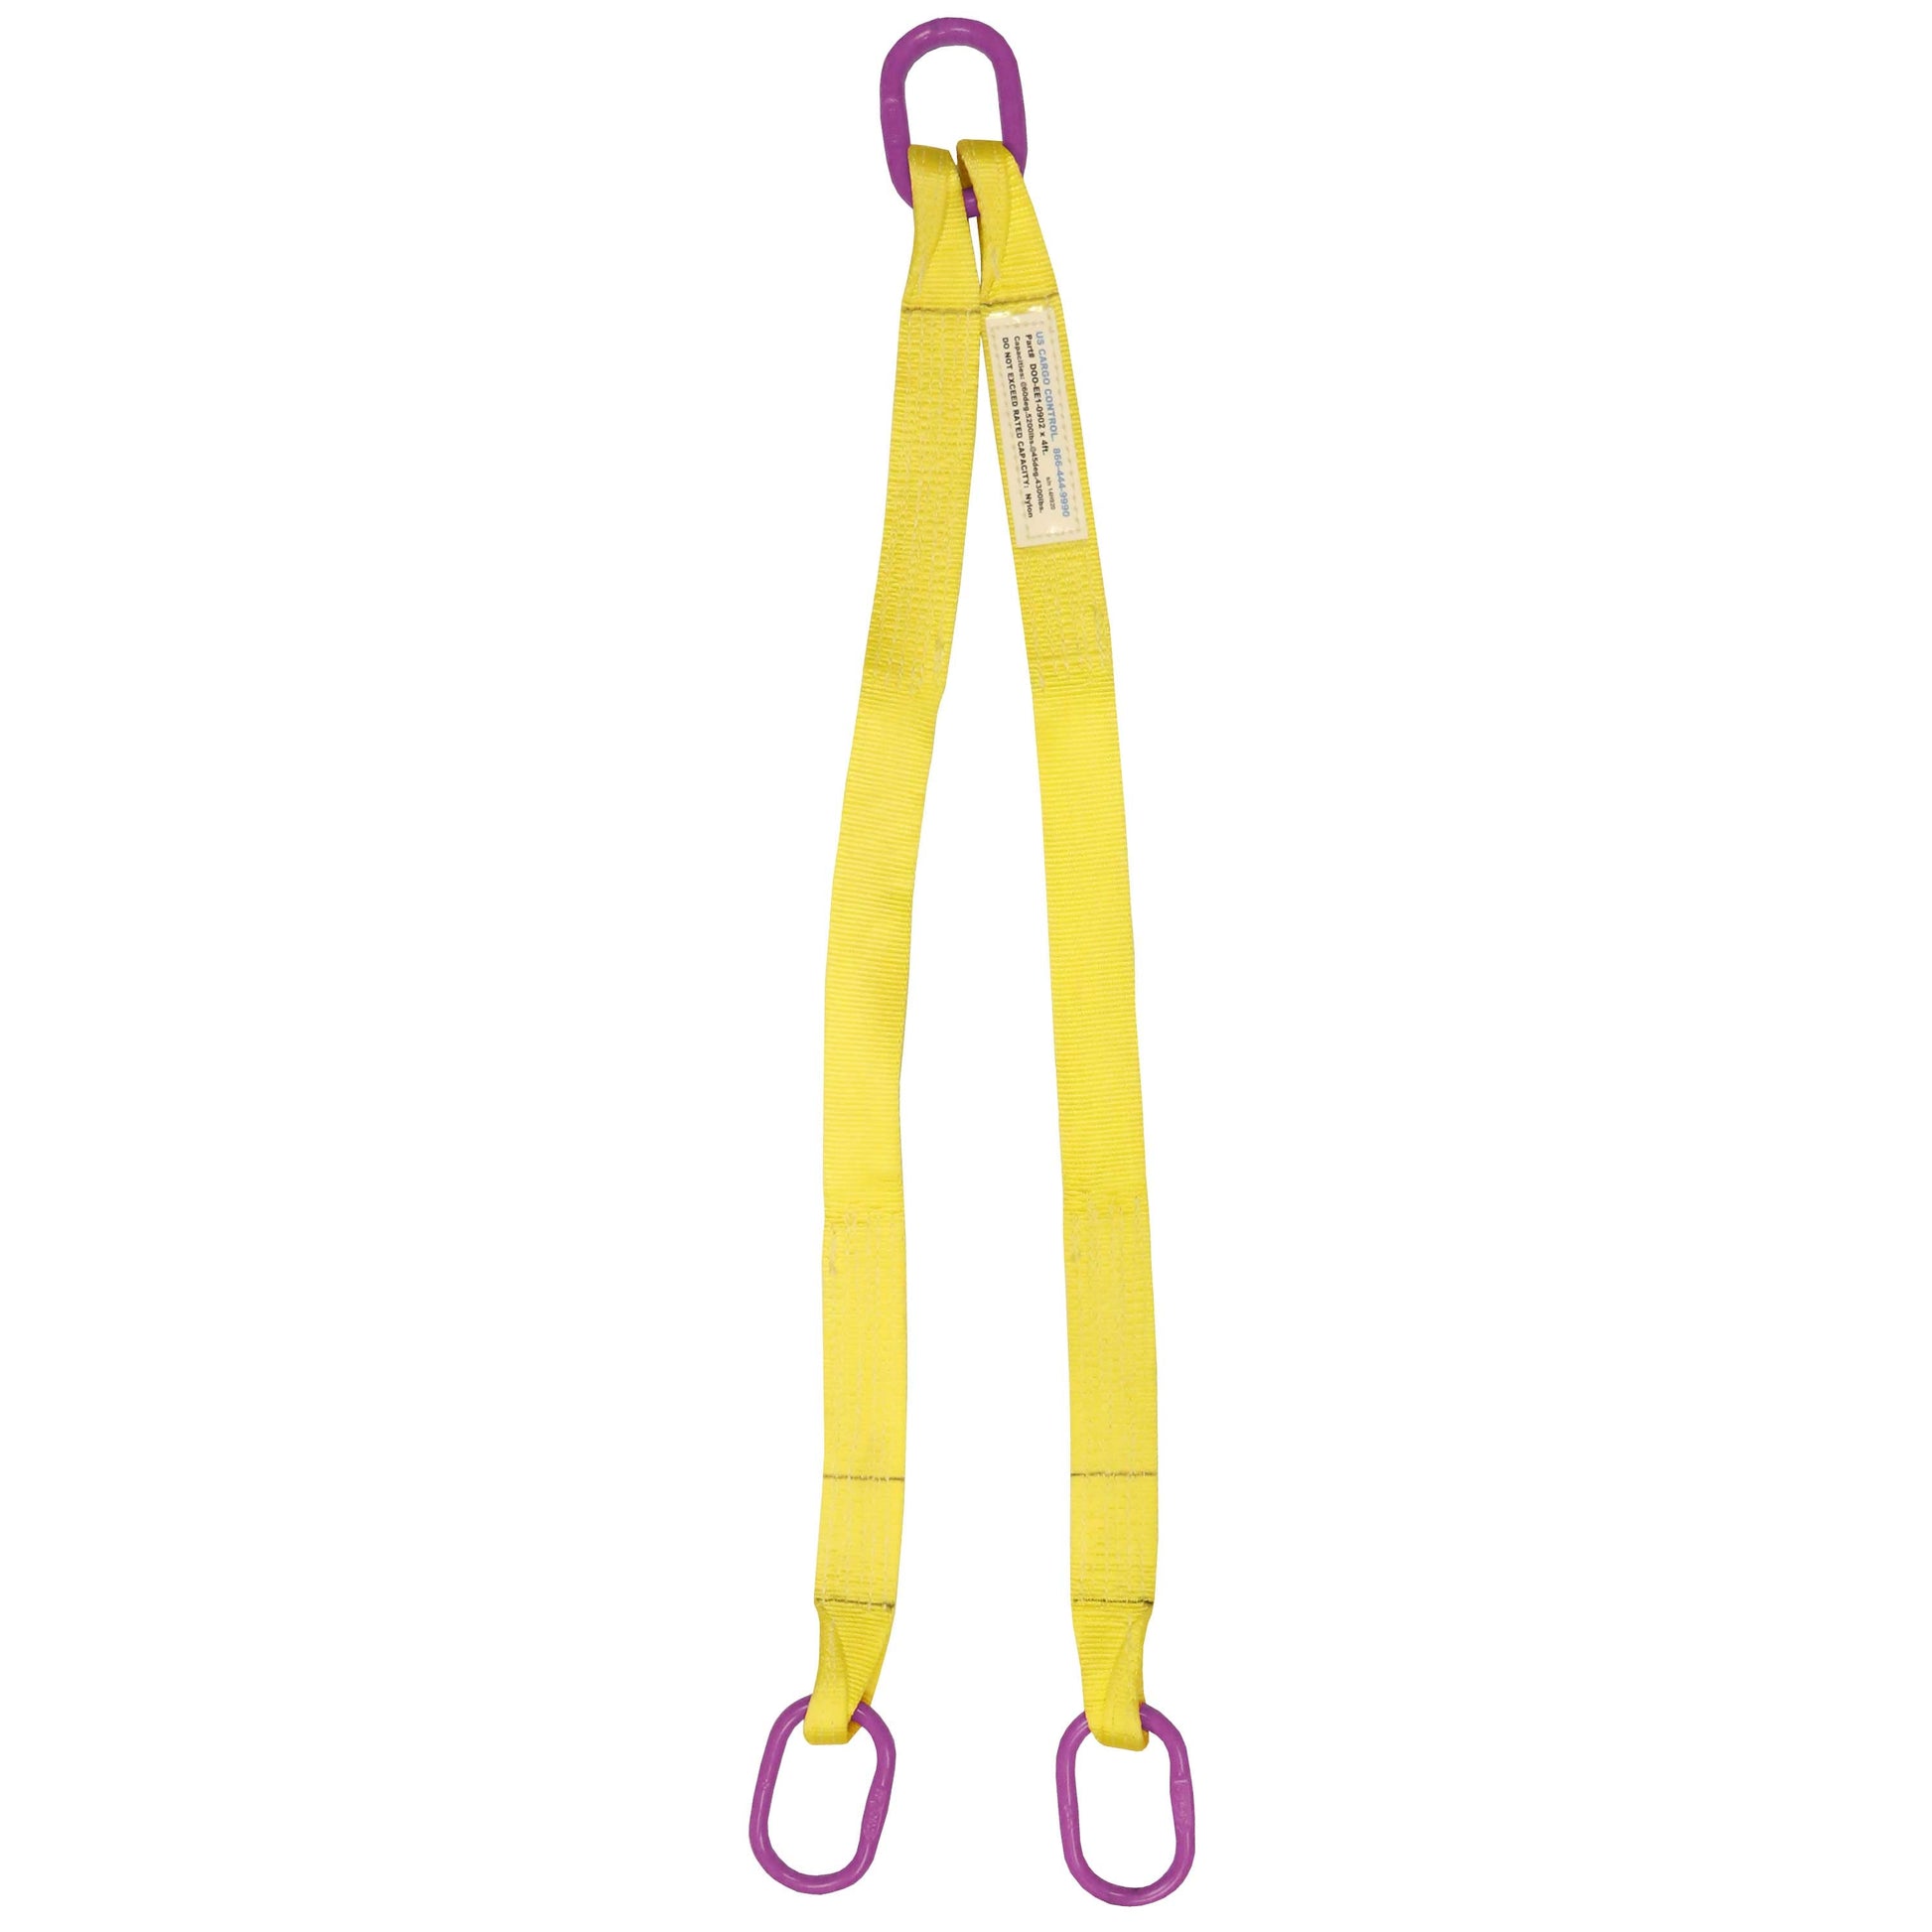 2 inchx6 foot (2 ply) Double Leg Nylon Sling w Master Link Both Ends image